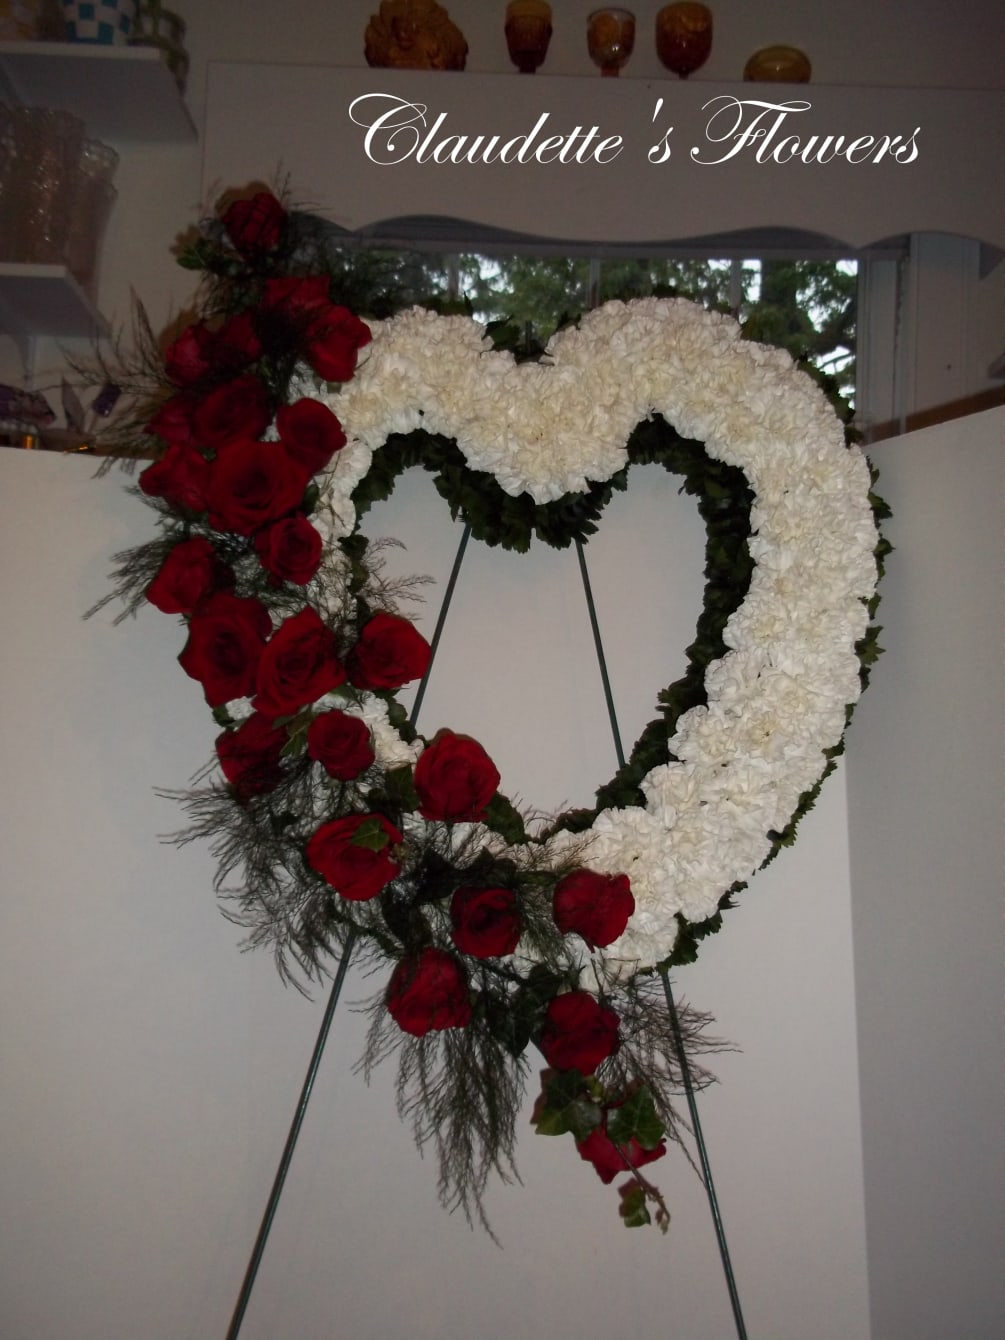 Red roses and white cushion mums make this a stunning tribute to